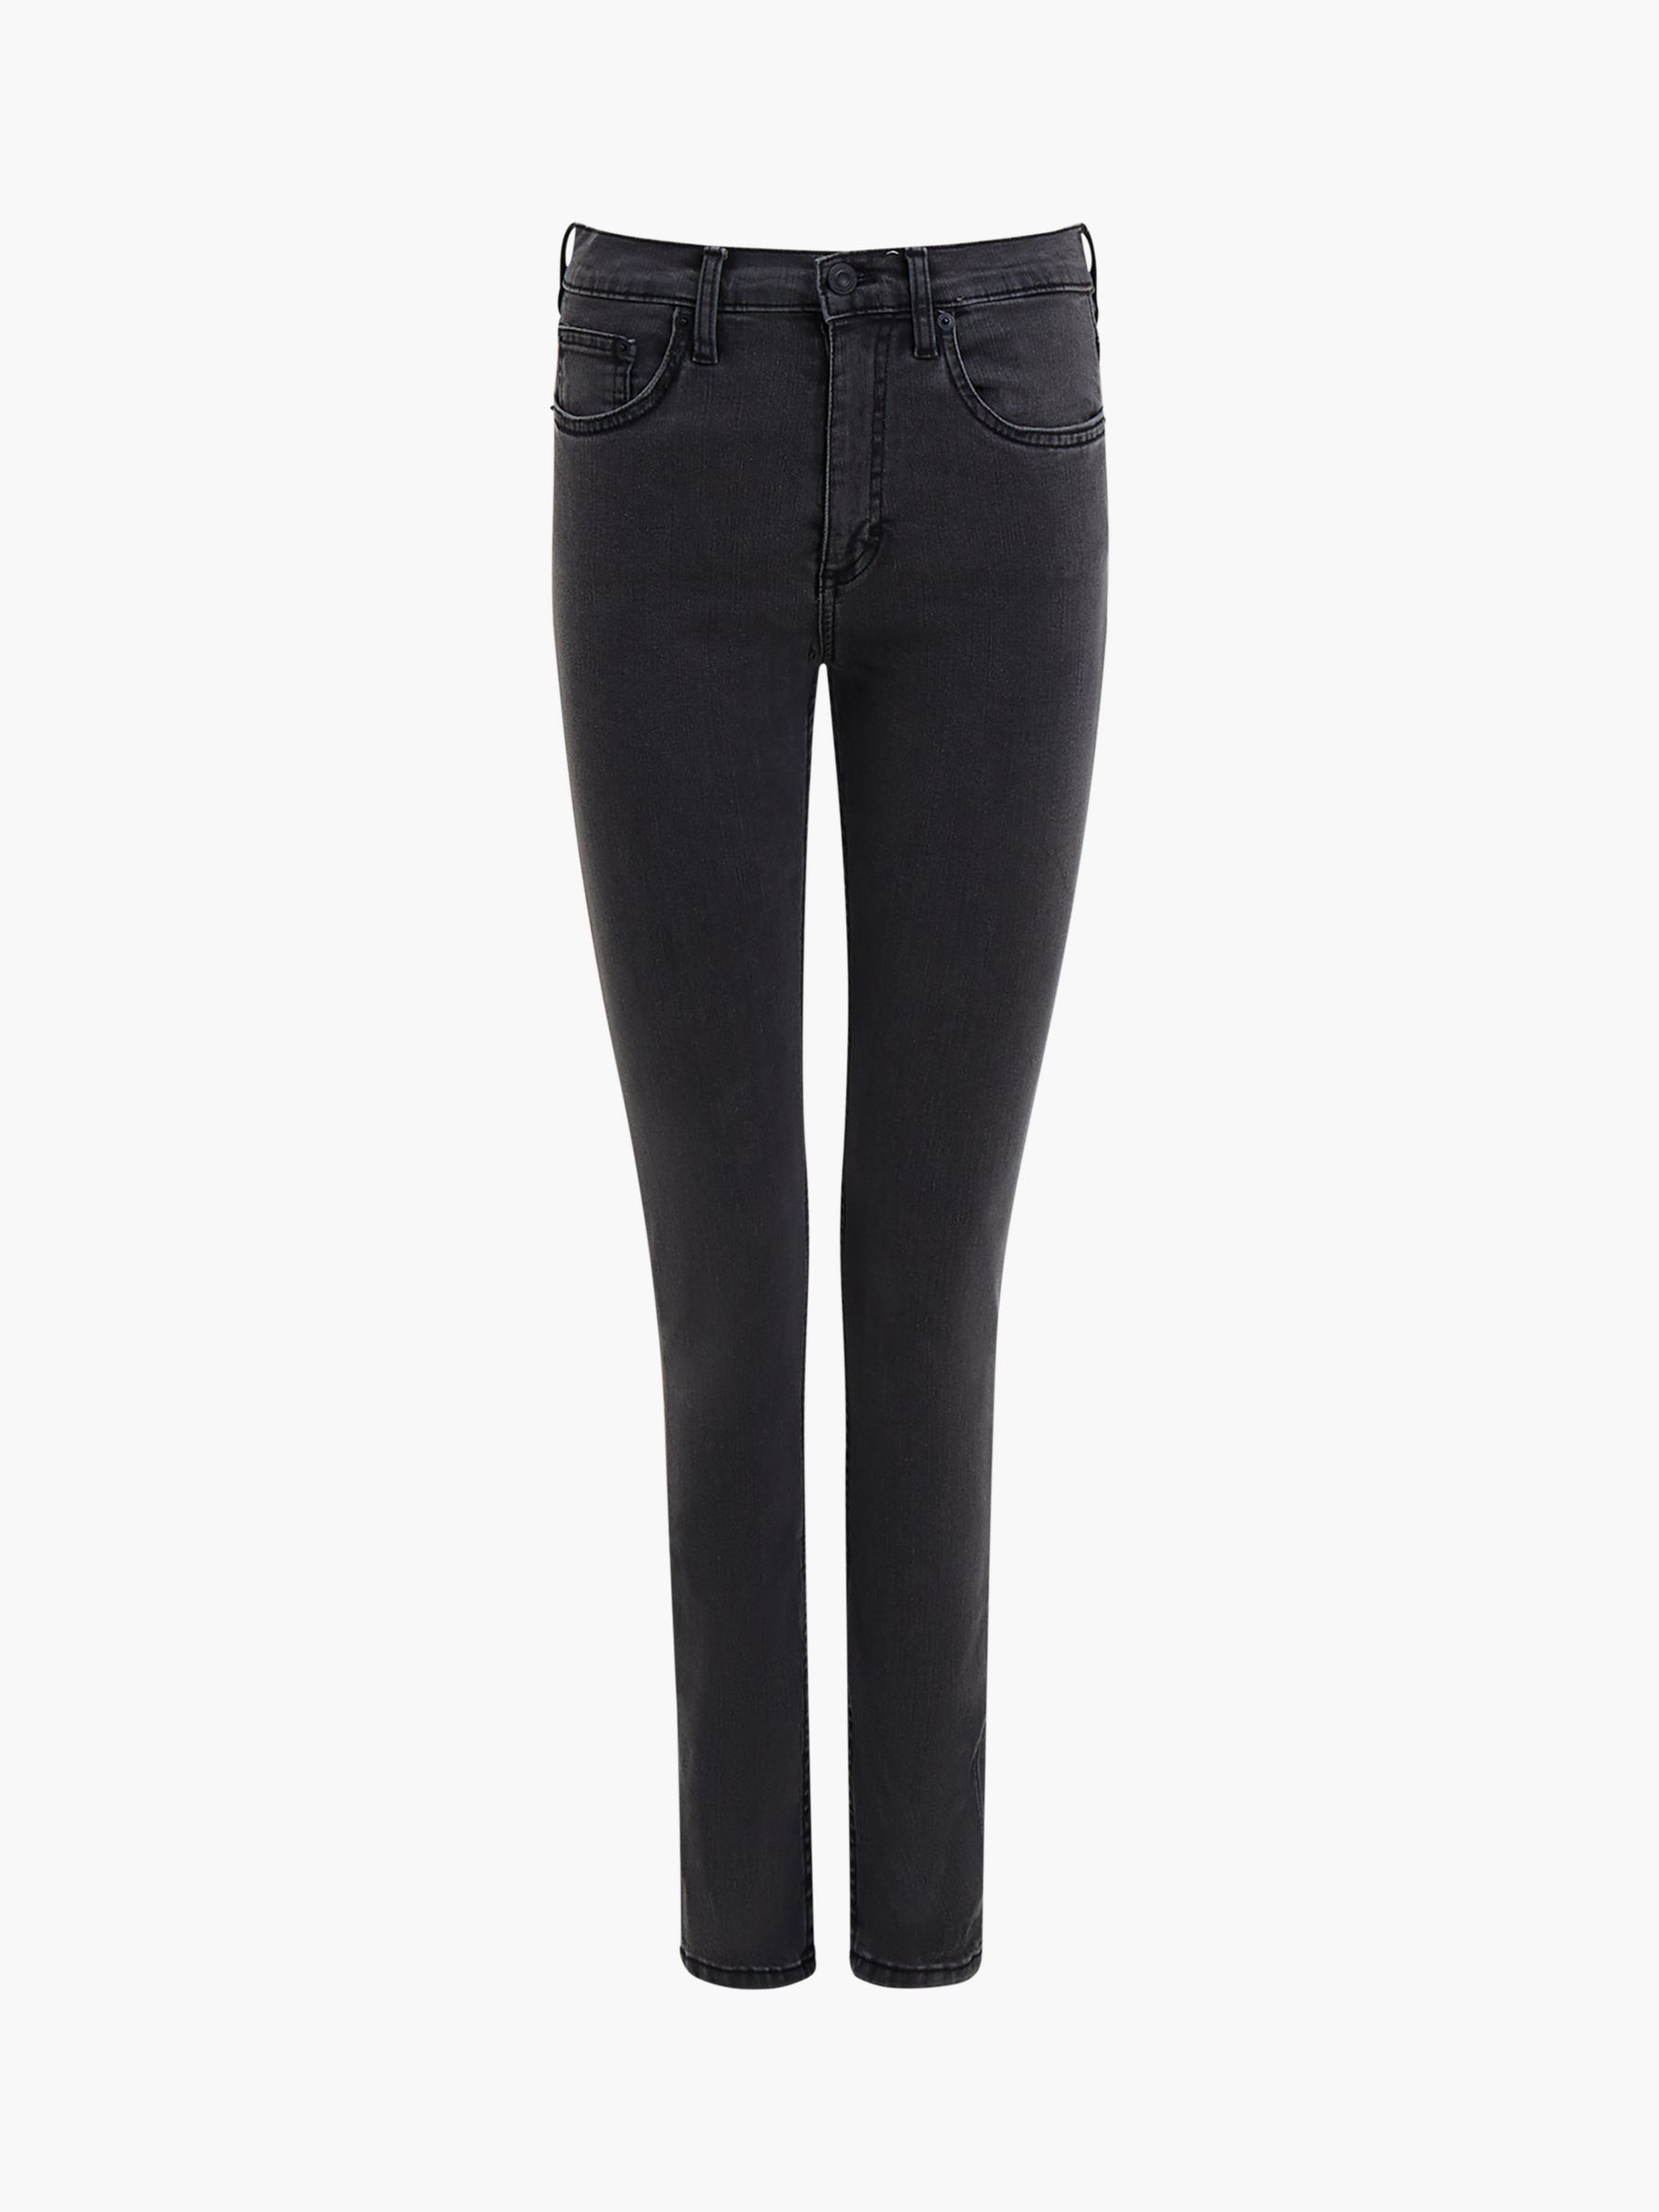 Buy French Connection Rebound Response Skinny Jeans Online at johnlewis.com